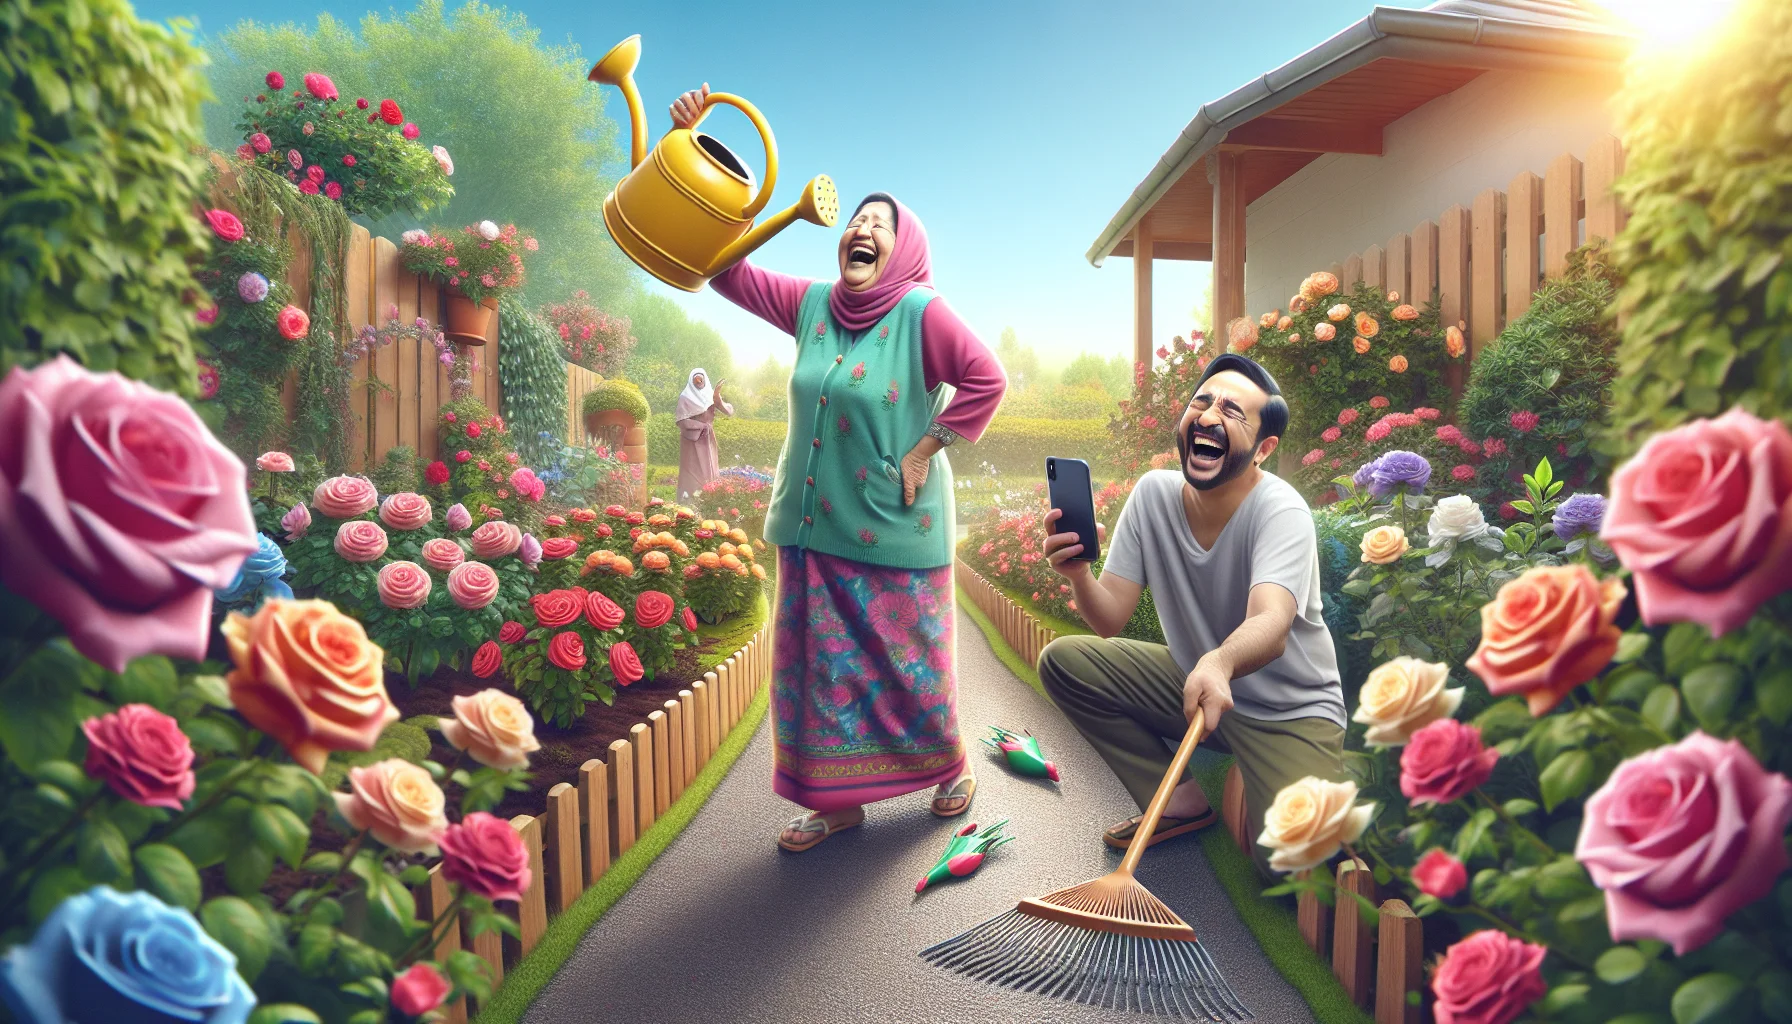 Create a realistic image with a scene that unfolds in a vibrant and colourful garden brimming with various types of roses. The central part of the image features an endearing, comedic moment. A South Asian woman laughing heartily as she waters her plants with a novelty watering can shaped like an oversized teapot. In contrast, on the garden pathway, a Middle-Eastern man, trying to capture this fun-filled activity on his smartphone, steps on a rake and is caught with a surprised expression. The background is a heartwarming day with a clear blue sky, the sun shining bright, painting a picture that promotes gardening with a touch of humour.